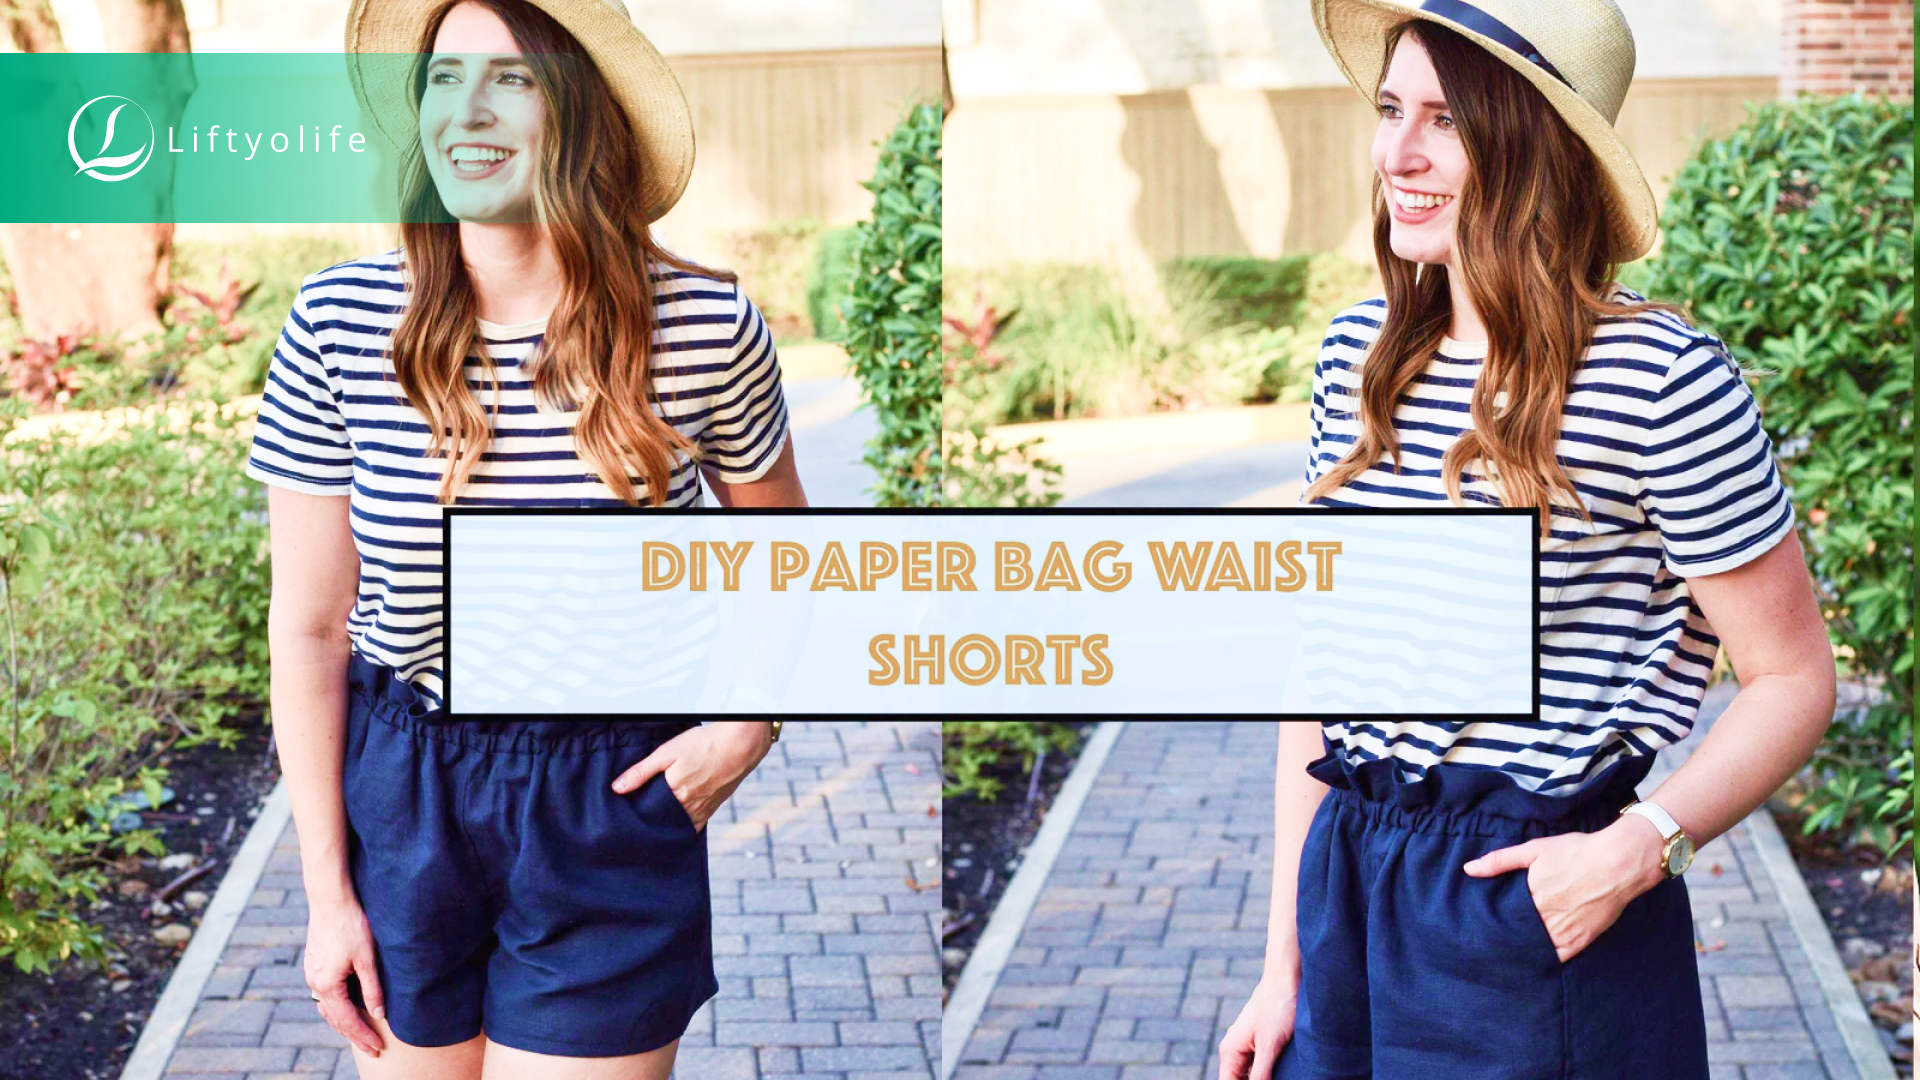 What are paperbag waist shorts?